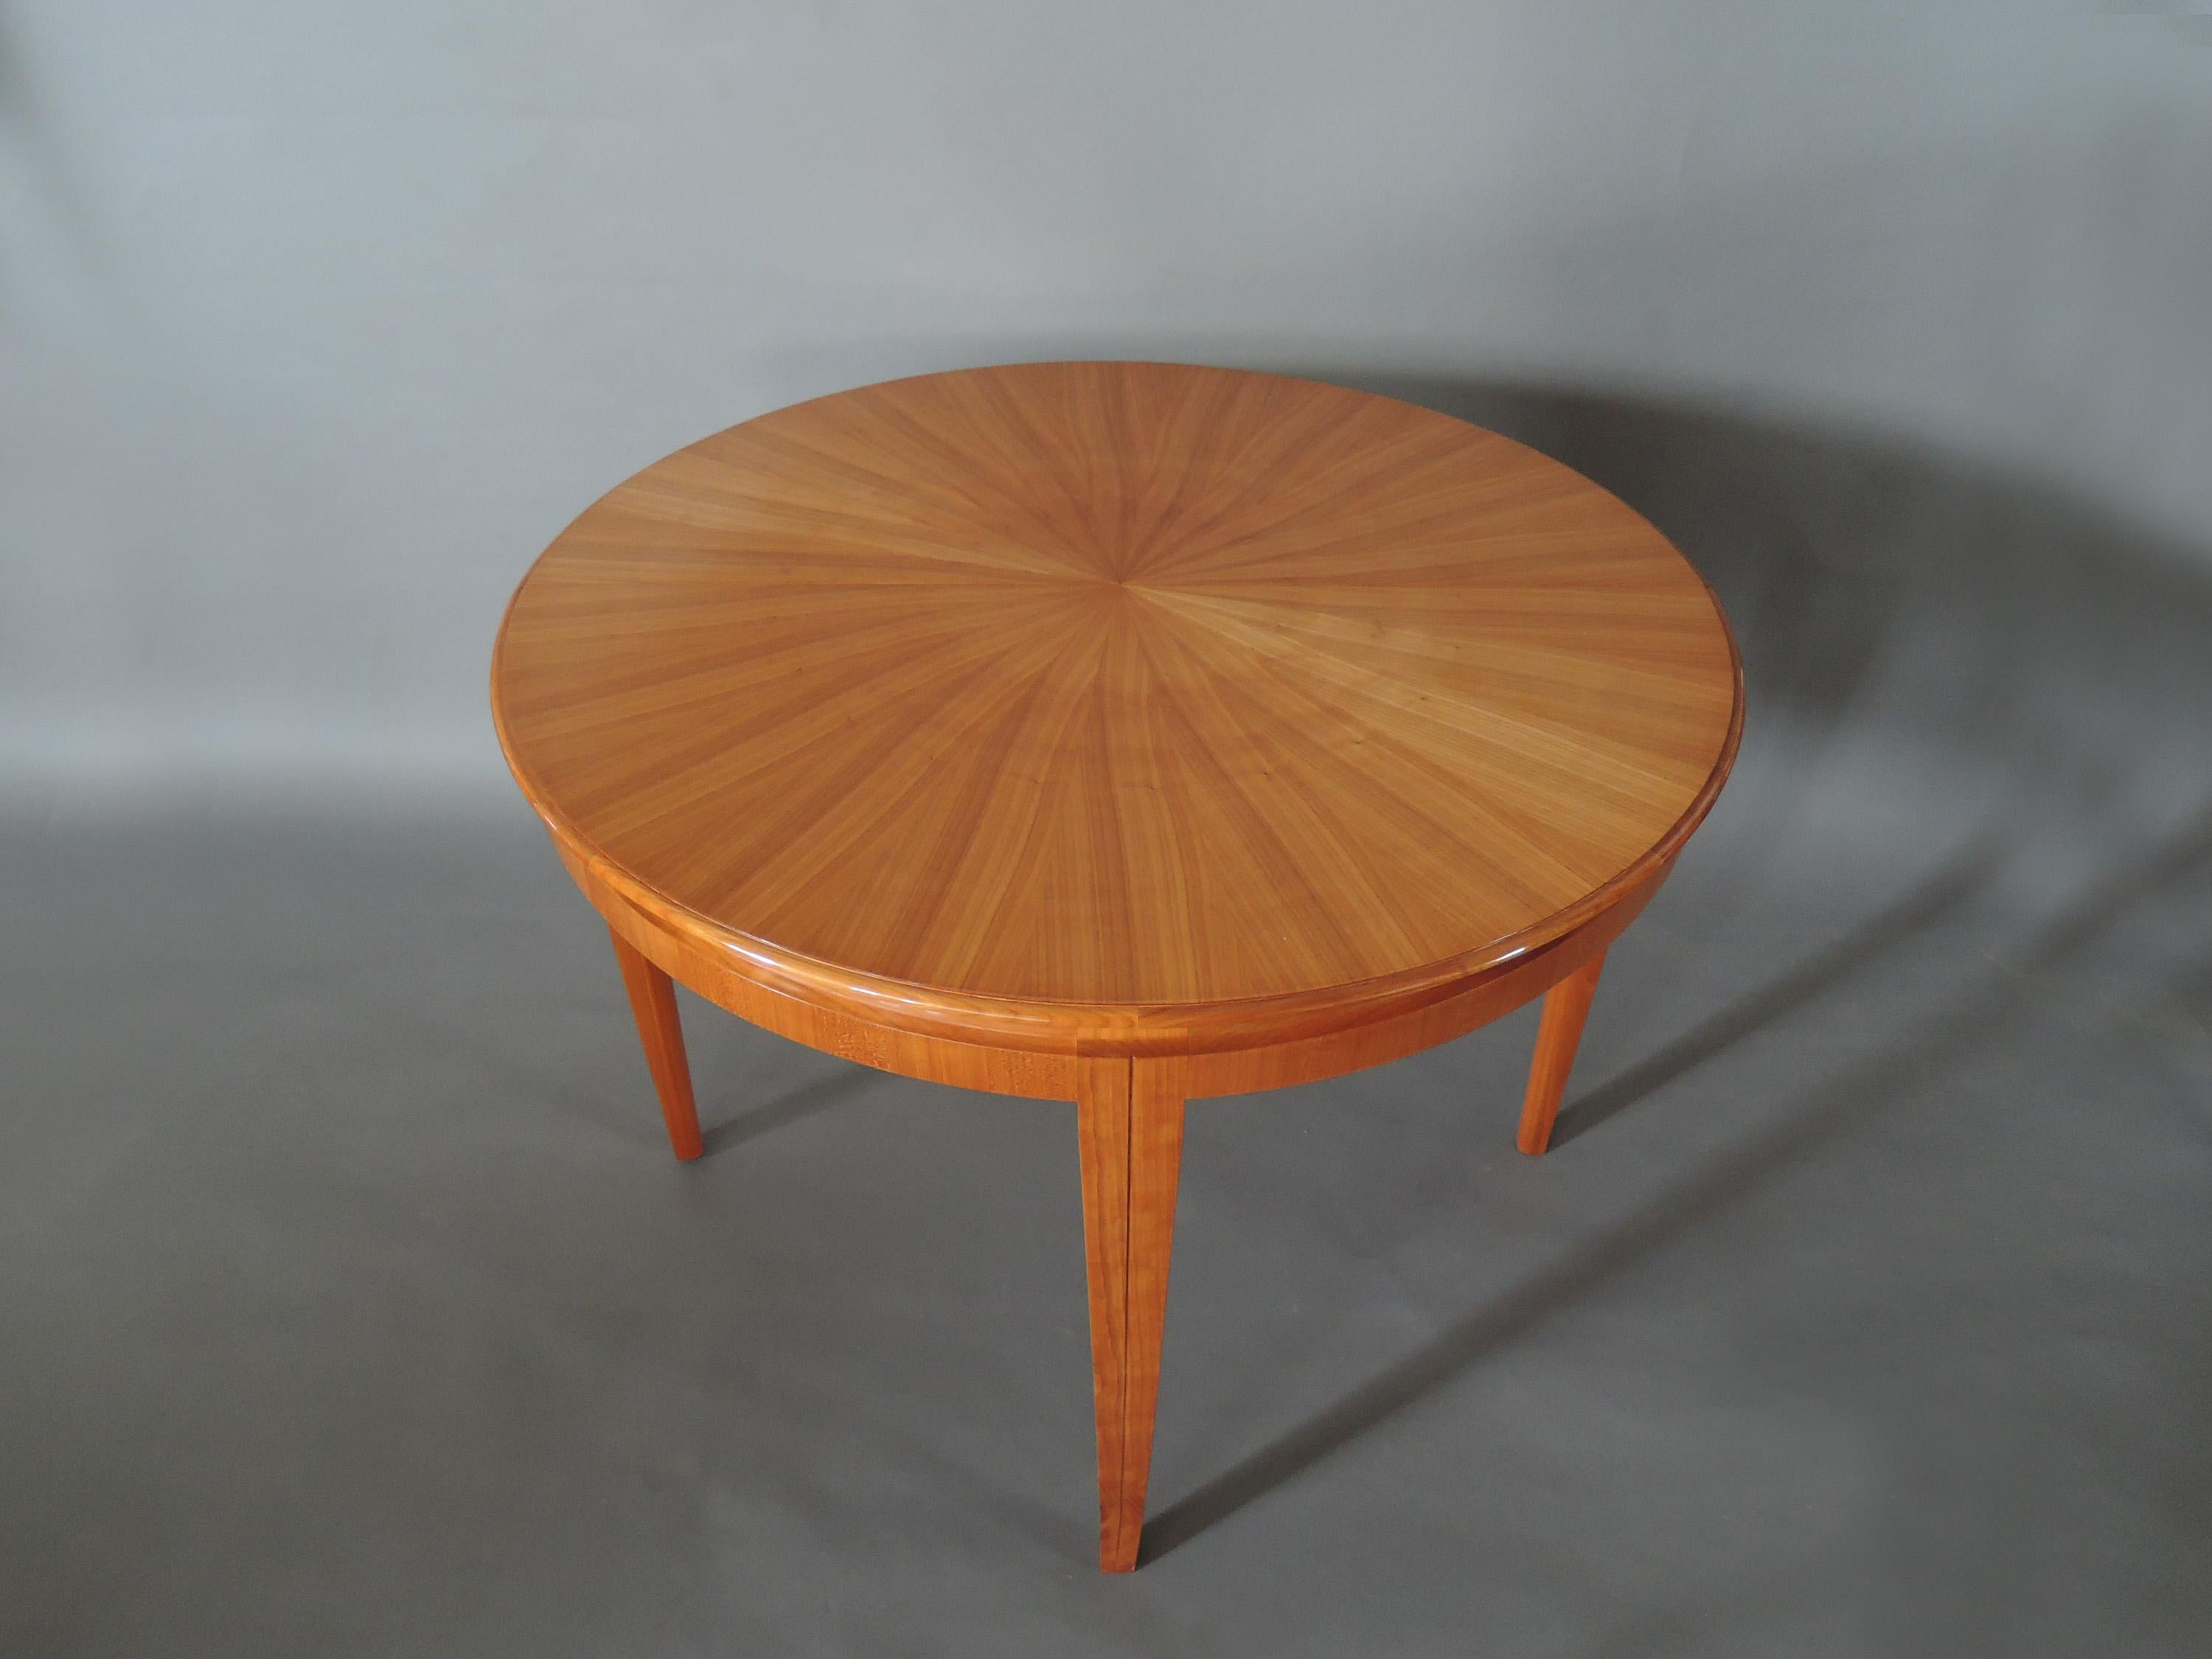 Mid-20th Century French 1950s Cherry Round Dining Table Divisible in 2 Demilune Tables For Sale